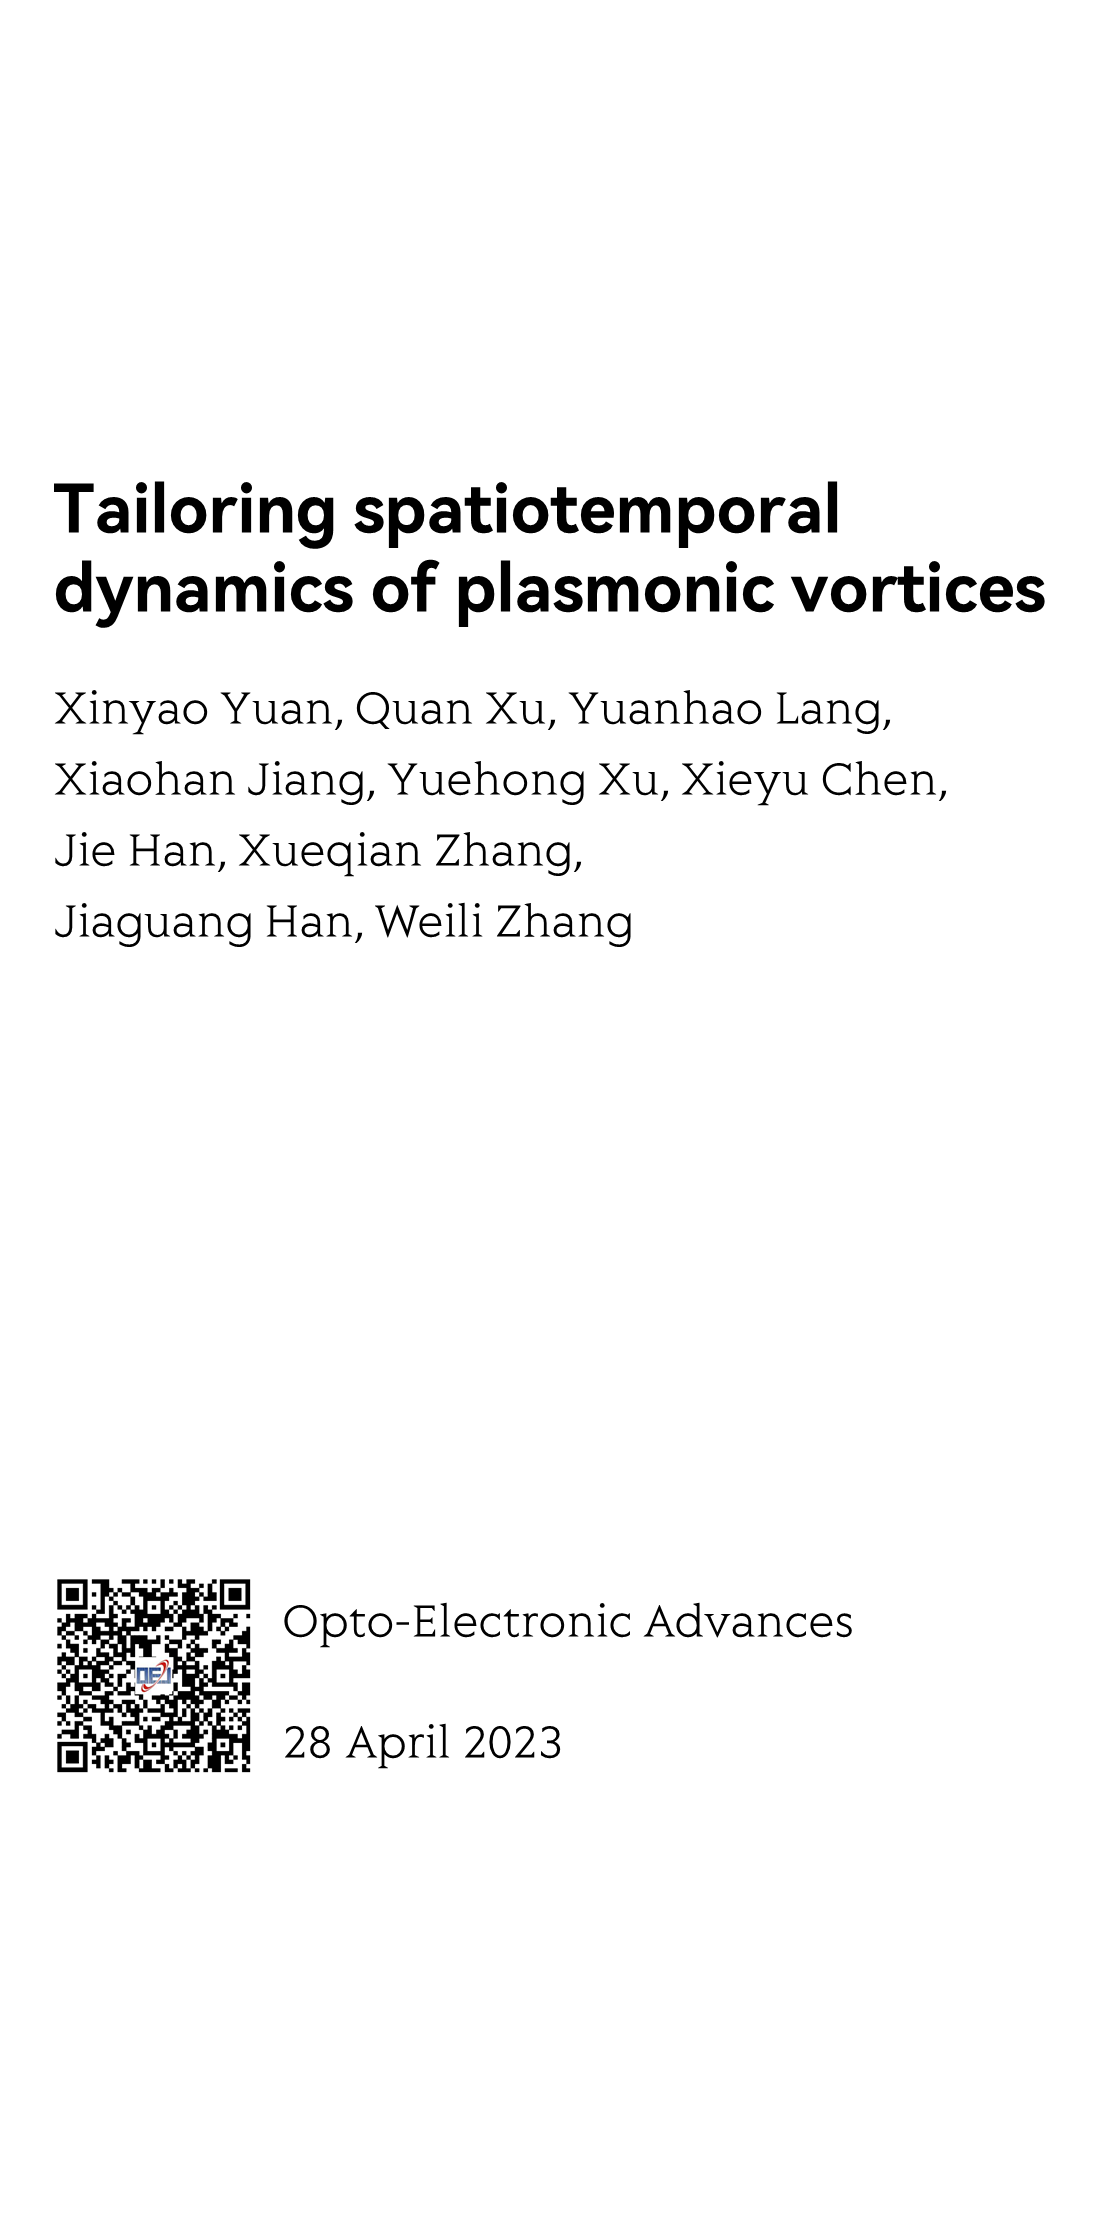 Tailoring spatiotemporal dynamics of plasmonic vortices_1